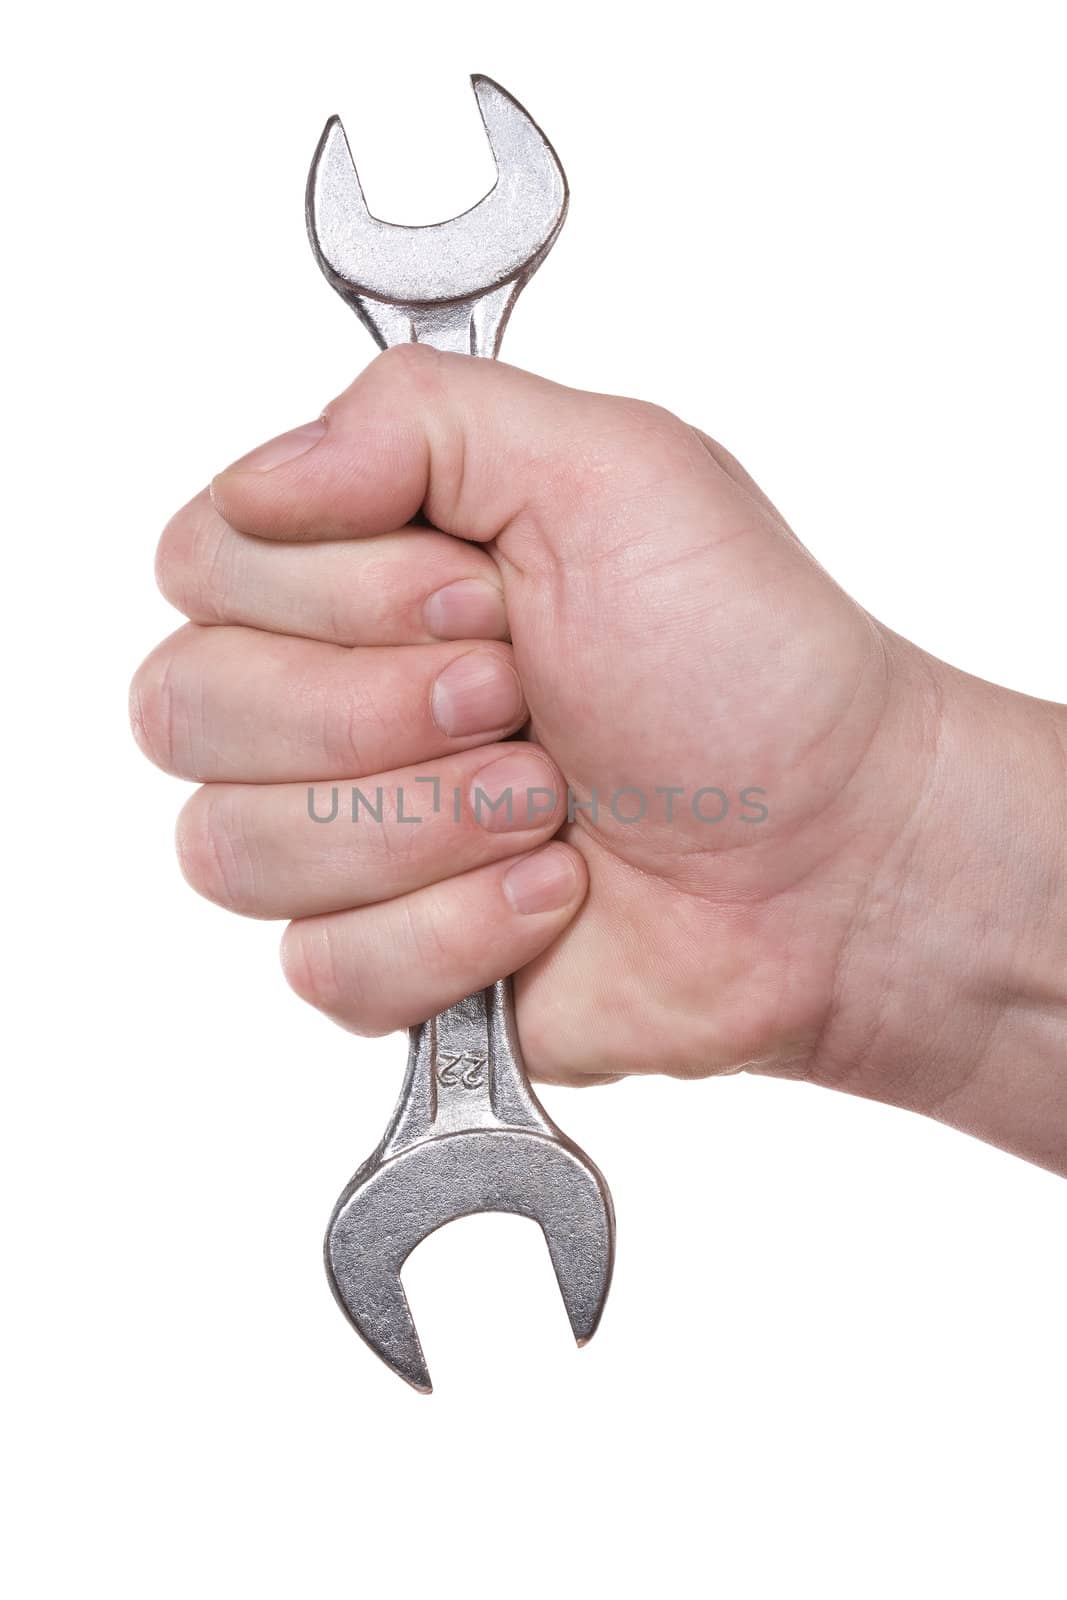 The hand holds wrench. Isolated on white [with clipping path].